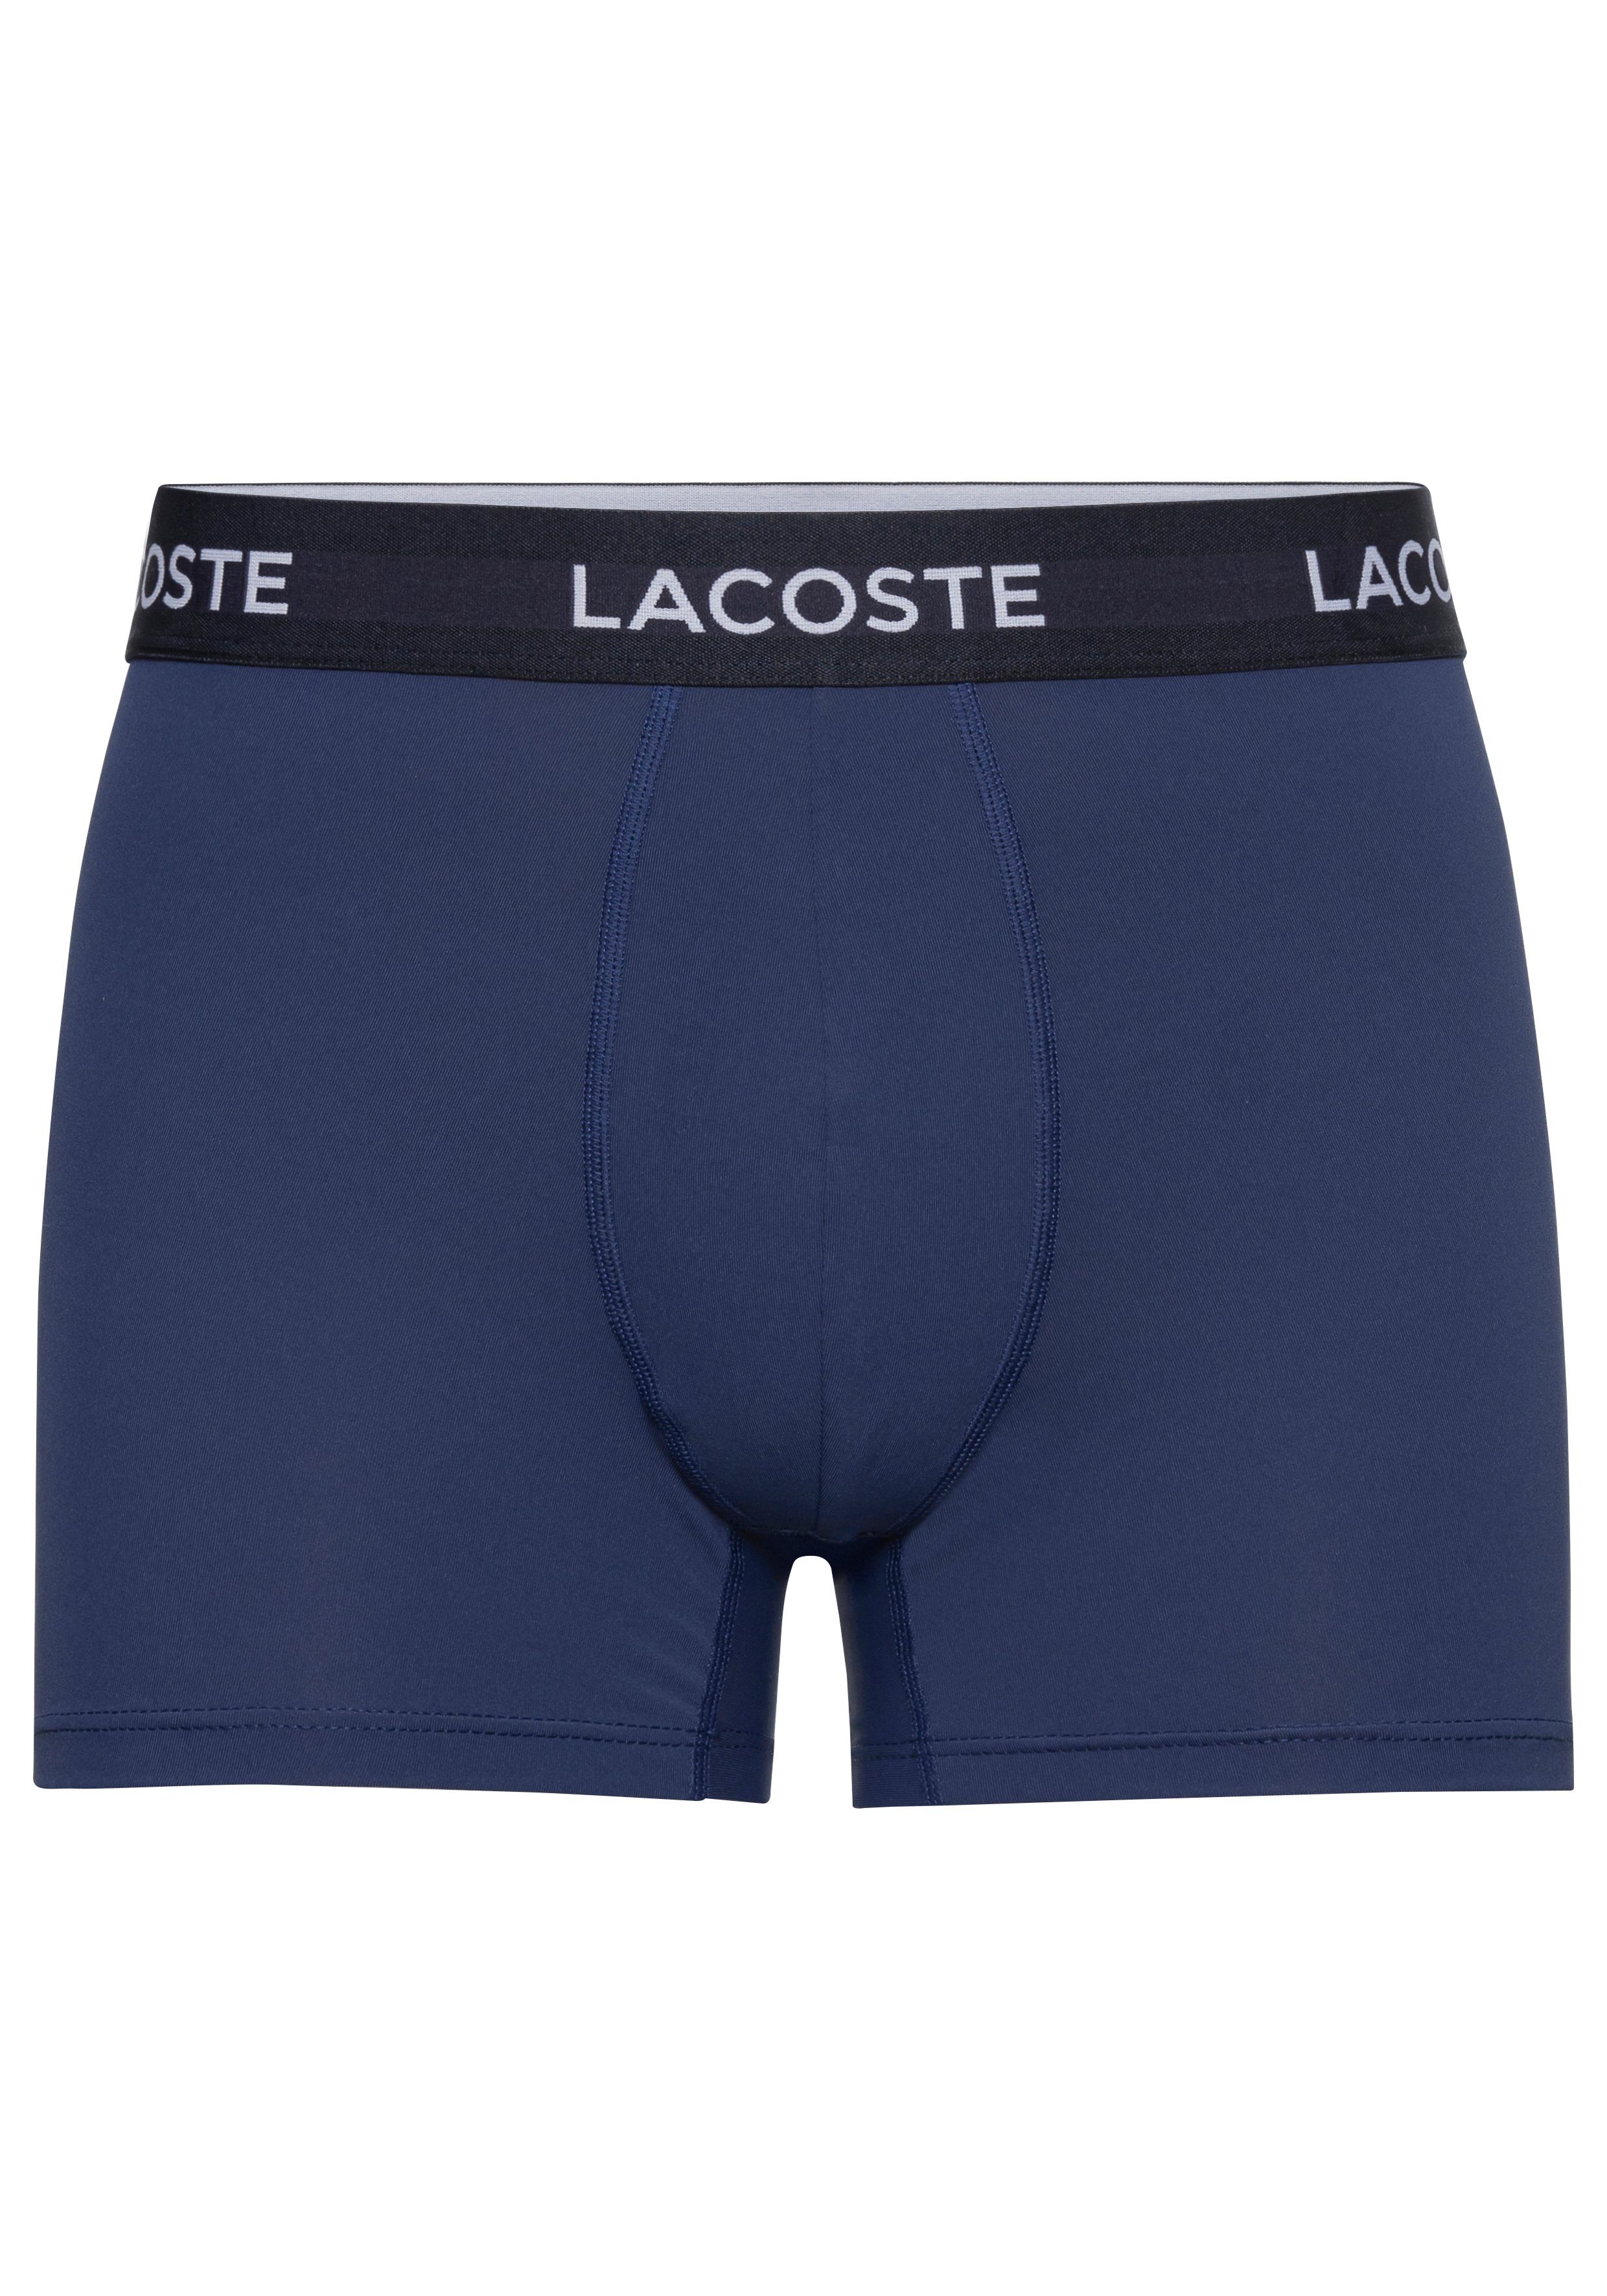 3-St) NAVY Lacoste (Packung, Boxer BLUE/METHYLENE-TROPICAL (VUC)